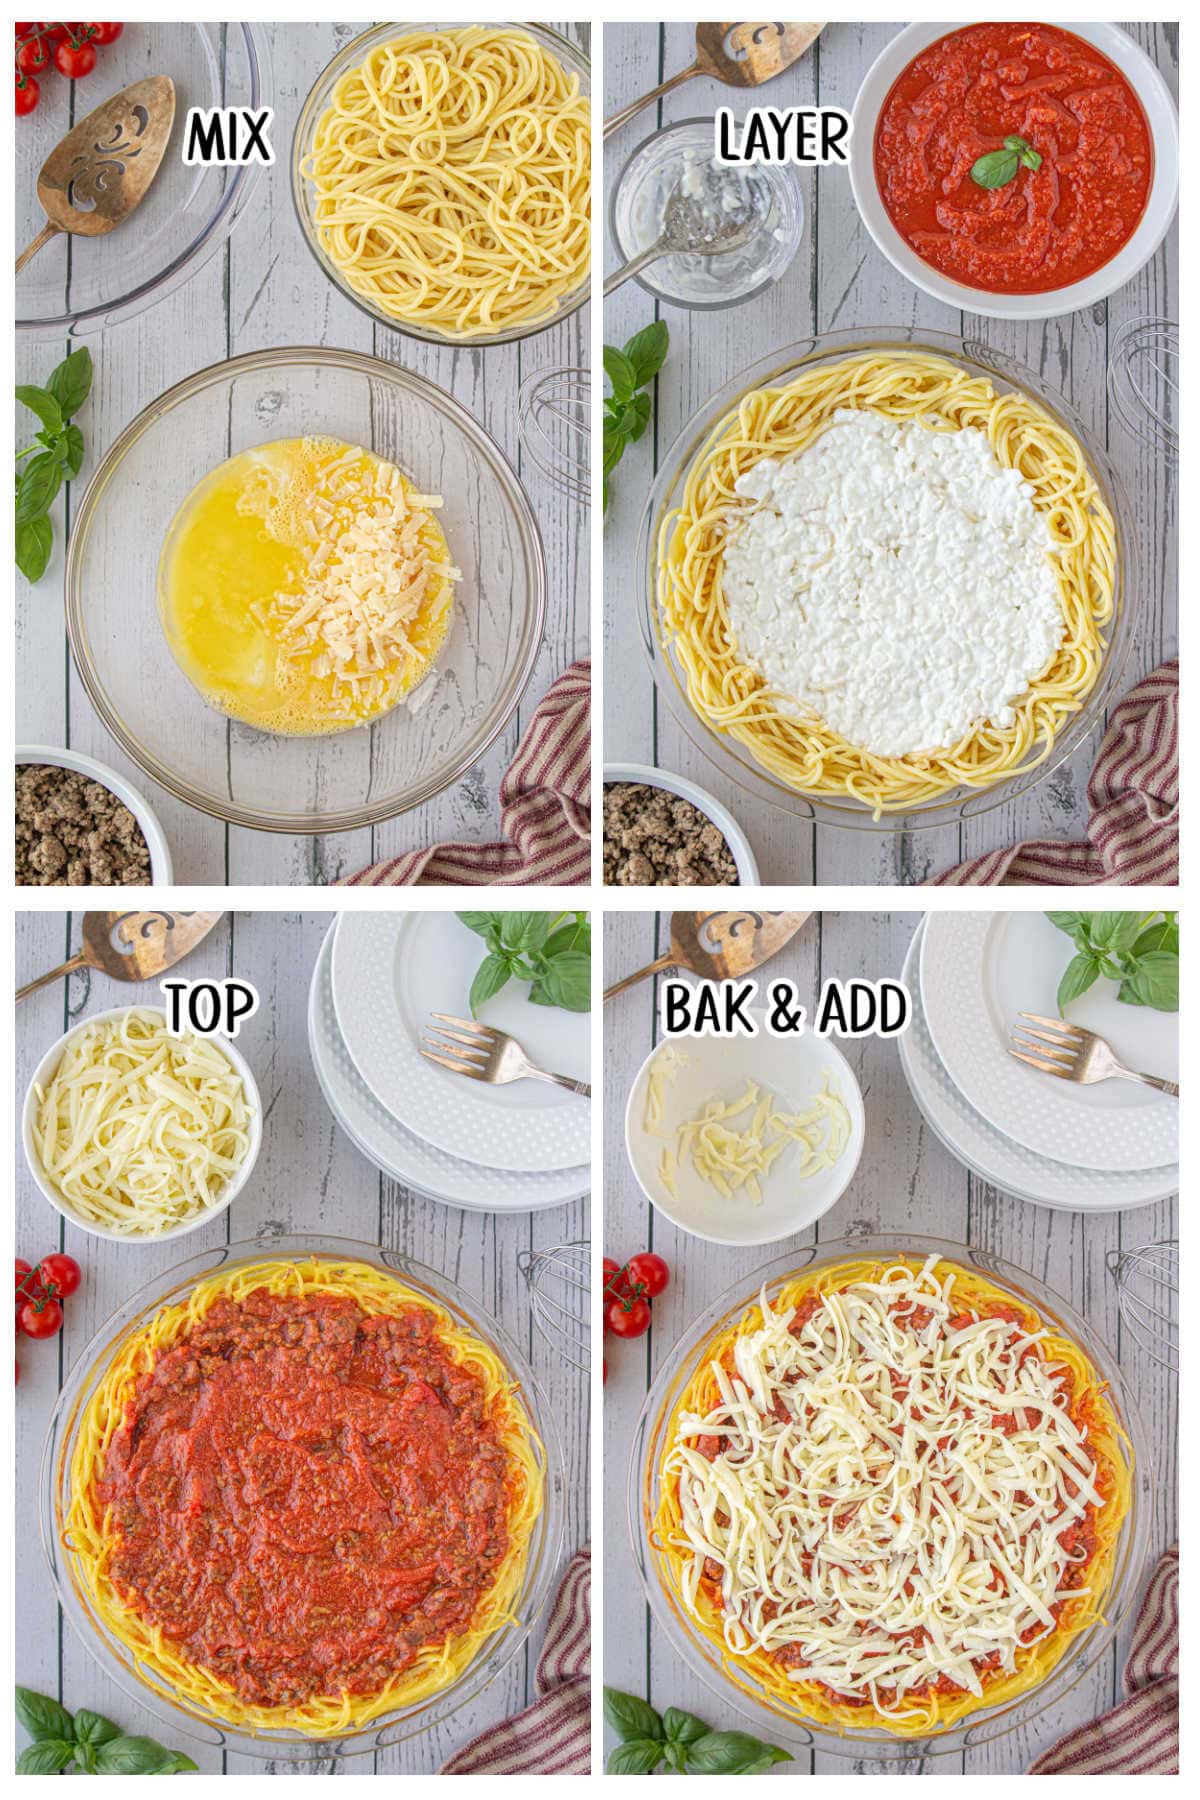 Step by step image showing how to make spaghetti pie.